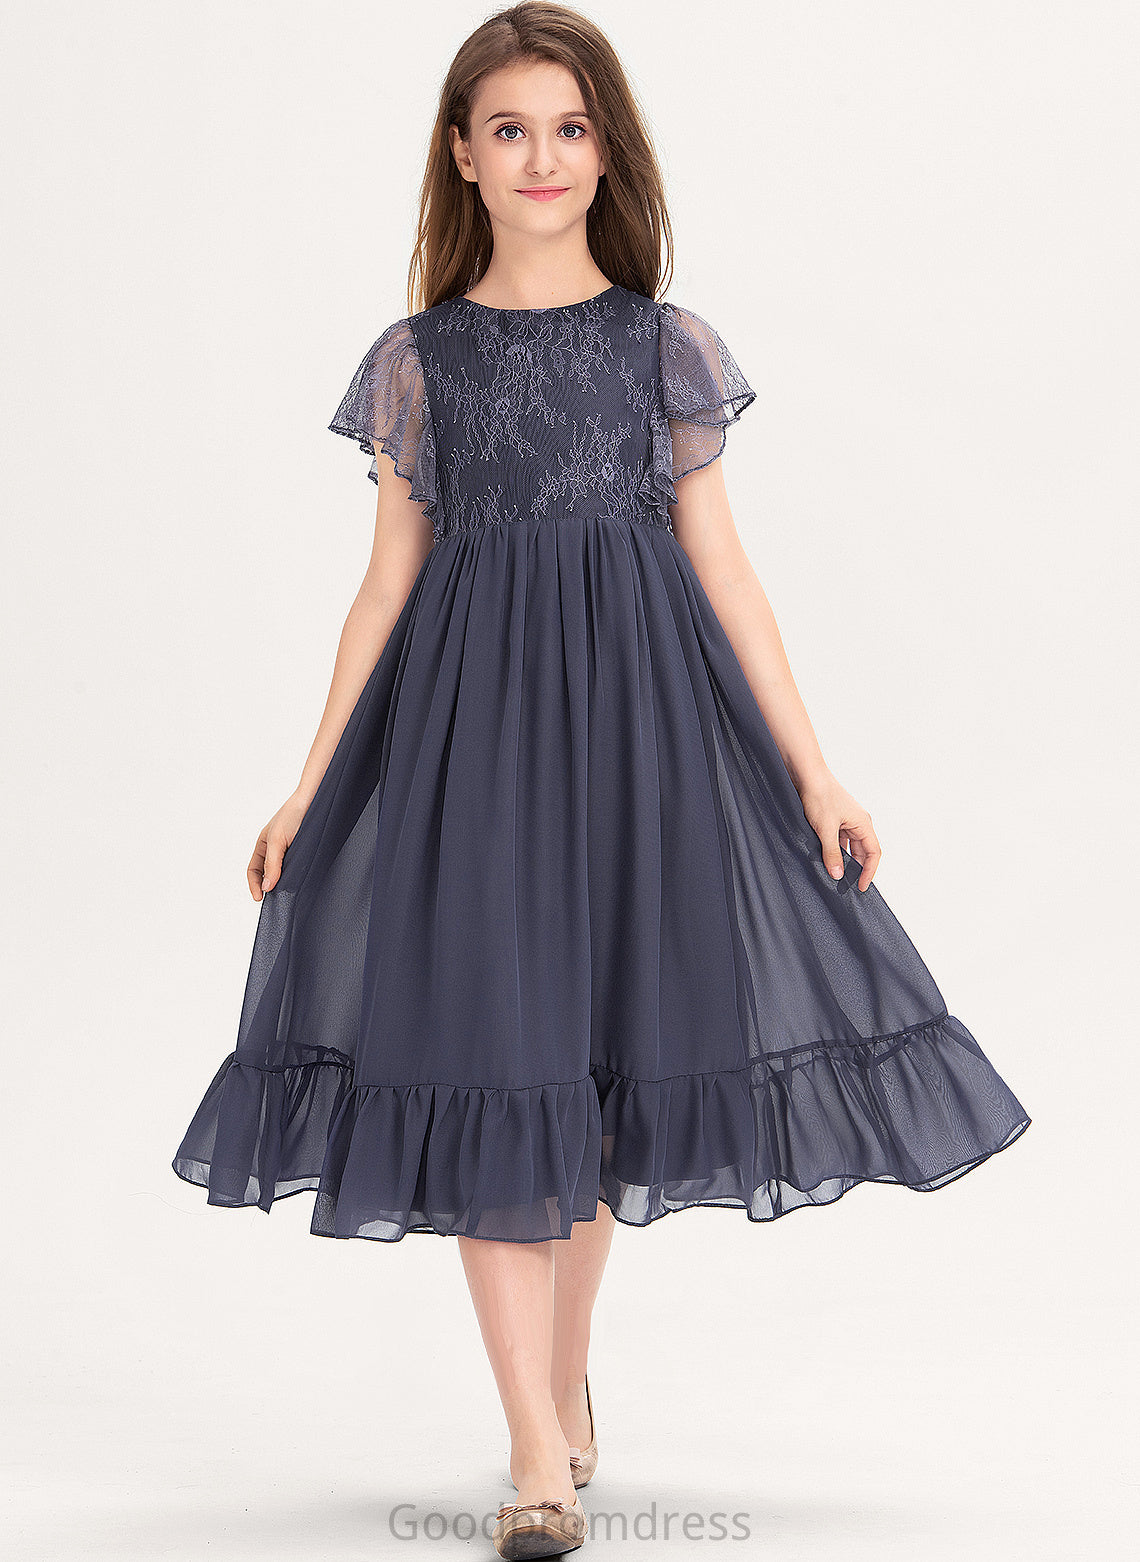 Scoop Knee-Length A-Line Lace Junior Bridesmaid Dresses Ruffles Chiffon With Neck Cascading Dulce